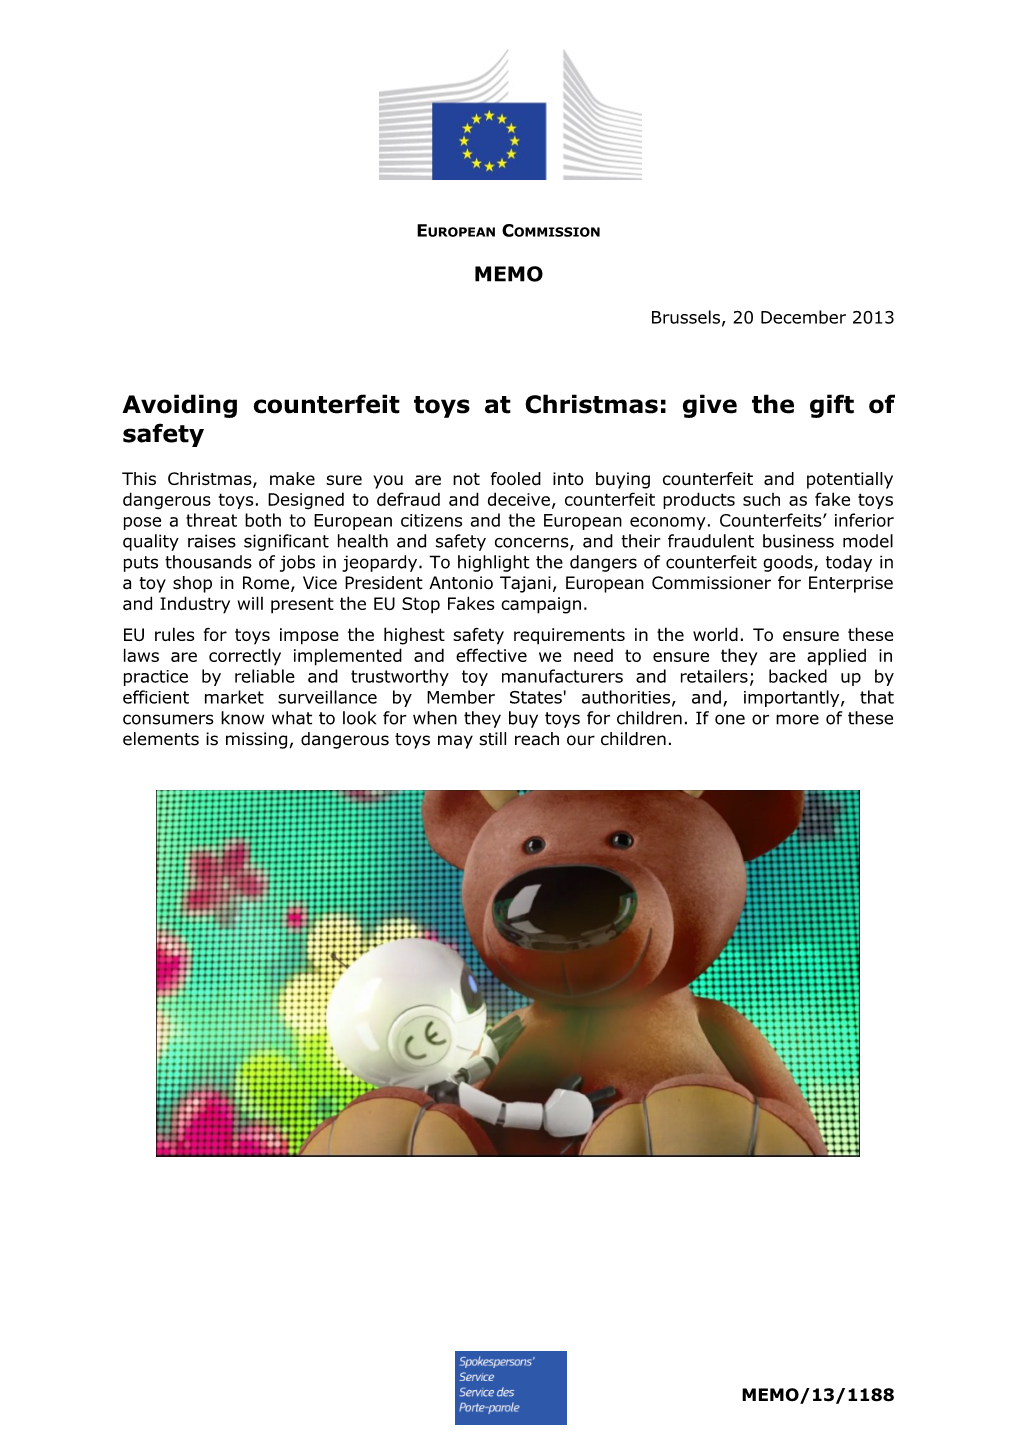 Avoiding Counterfeit Toys at Christmas: Give the Gift of Safety